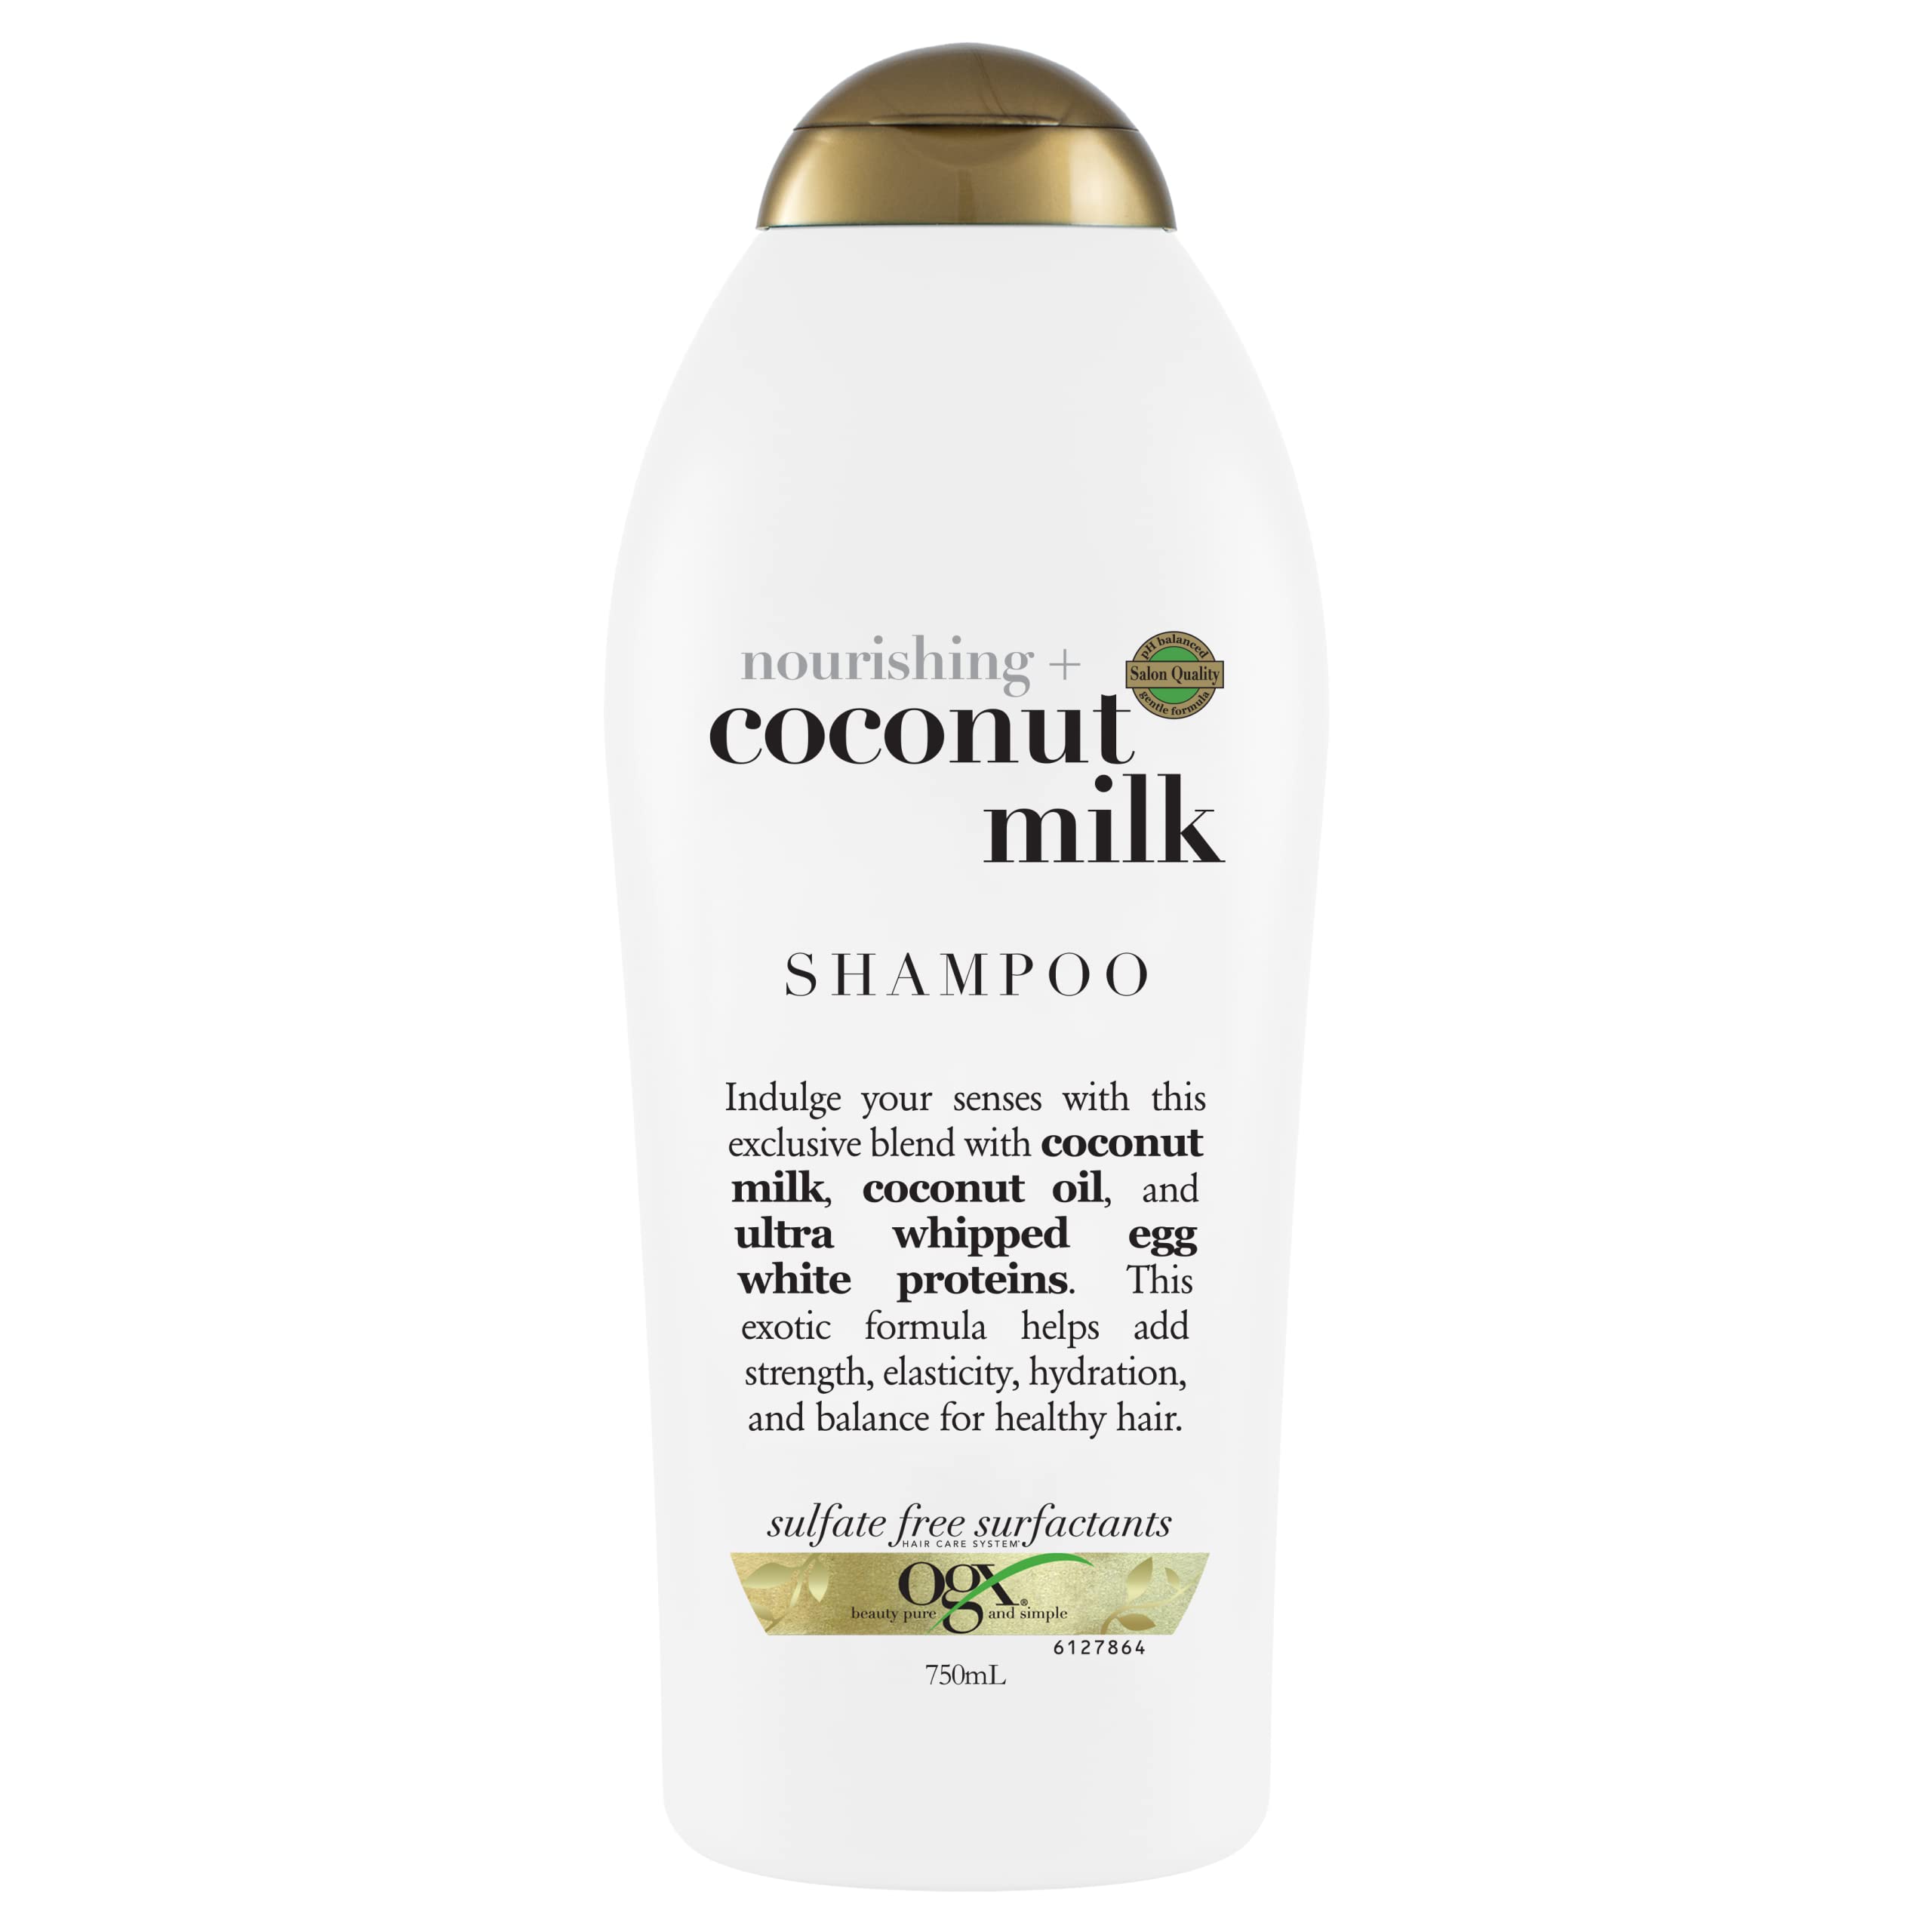 OGX Nourishing + Coconut Milk Moisturizing Shampoo for Strong & Healthy Hair, with Coconut Milk, Coconut Oil & Egg White Protein, Paraben-Free, Sulfate-Free Surfactants, 25.4 fl oz